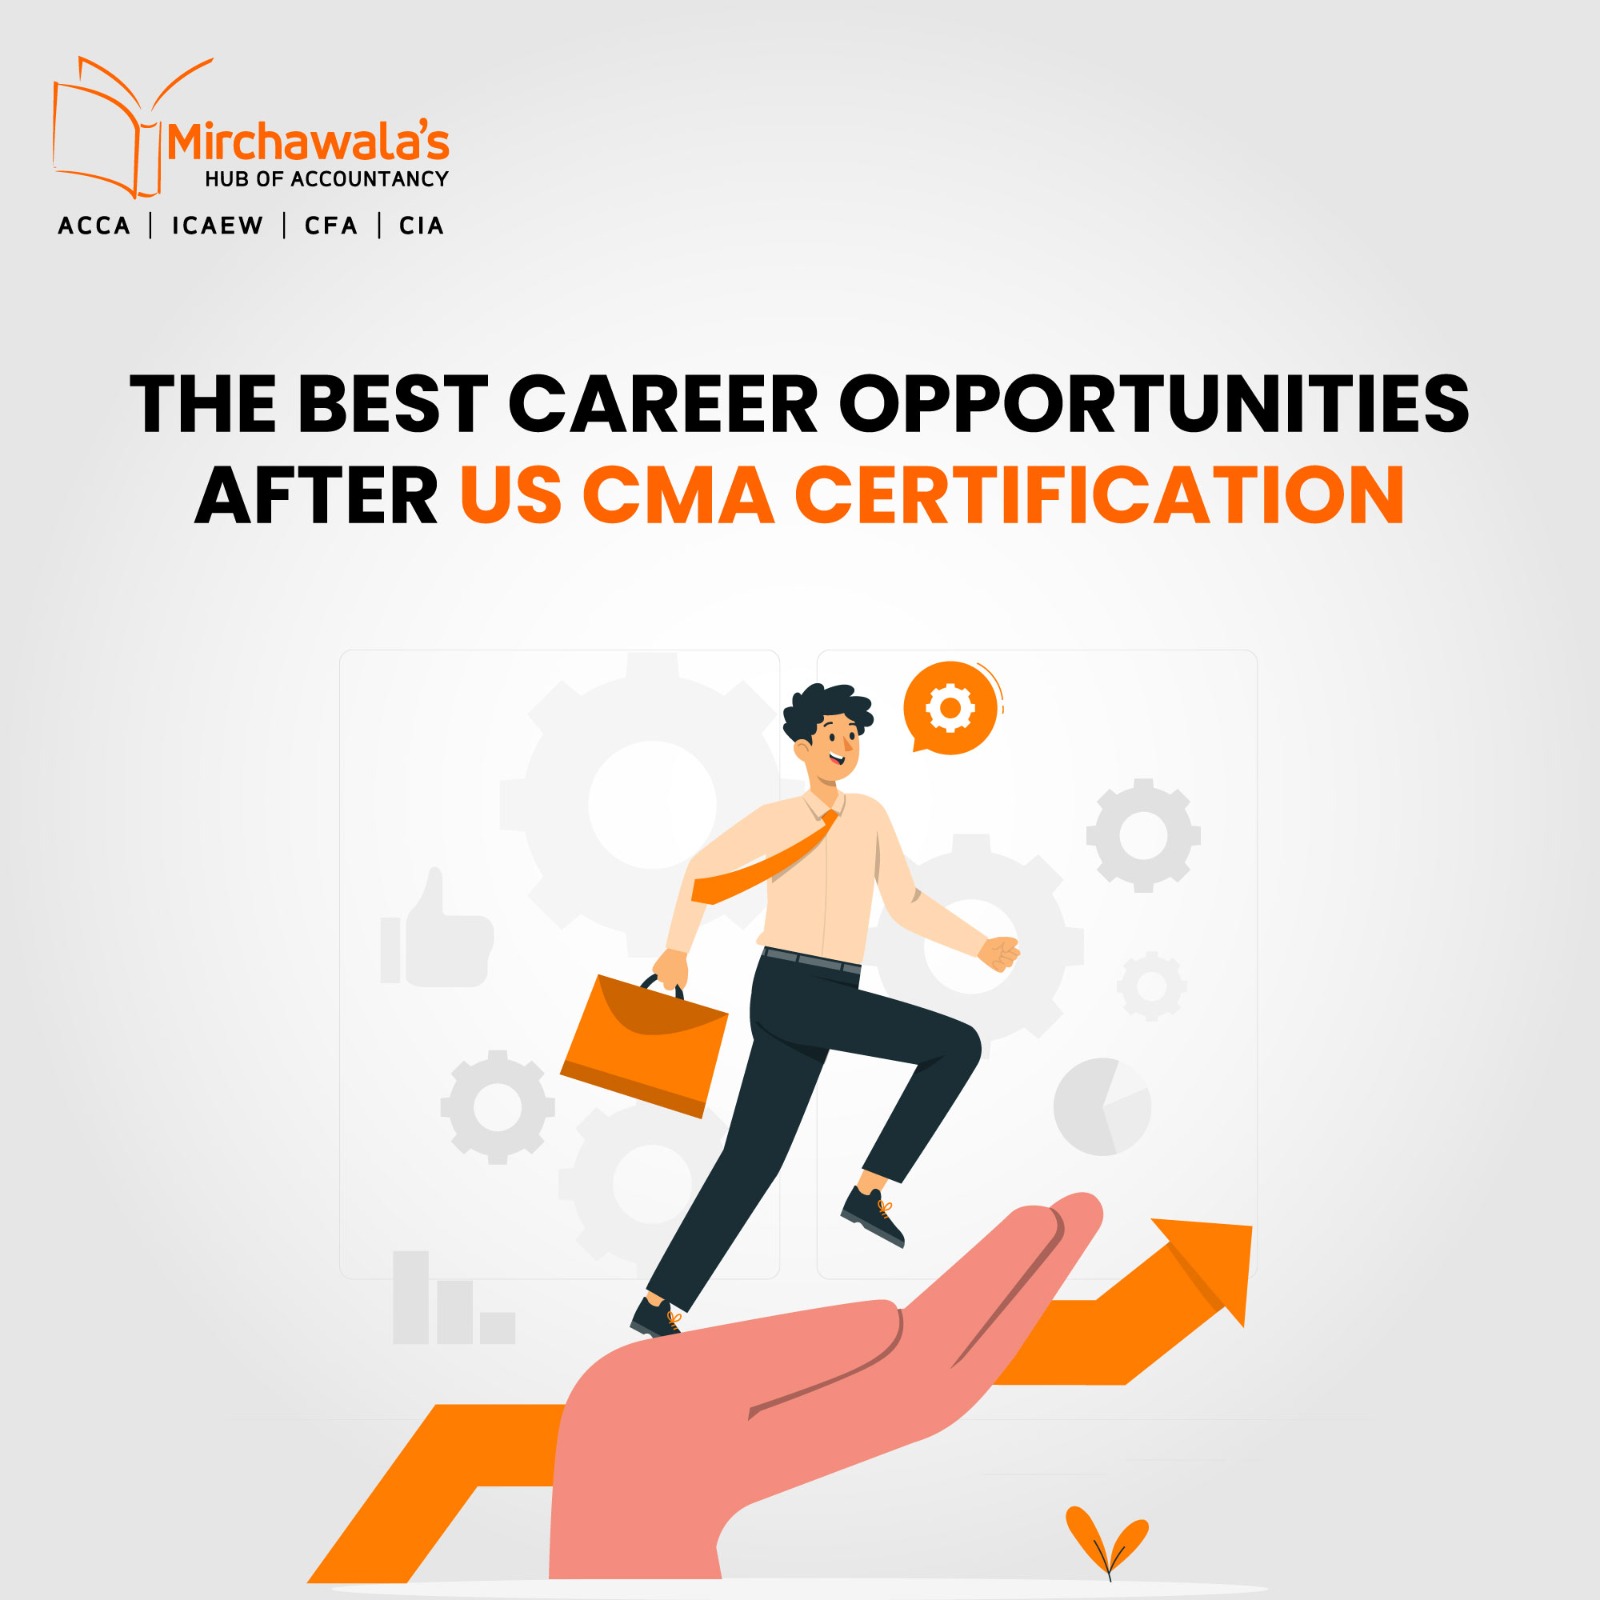 The Best Career Opportunities After US CMA Certification